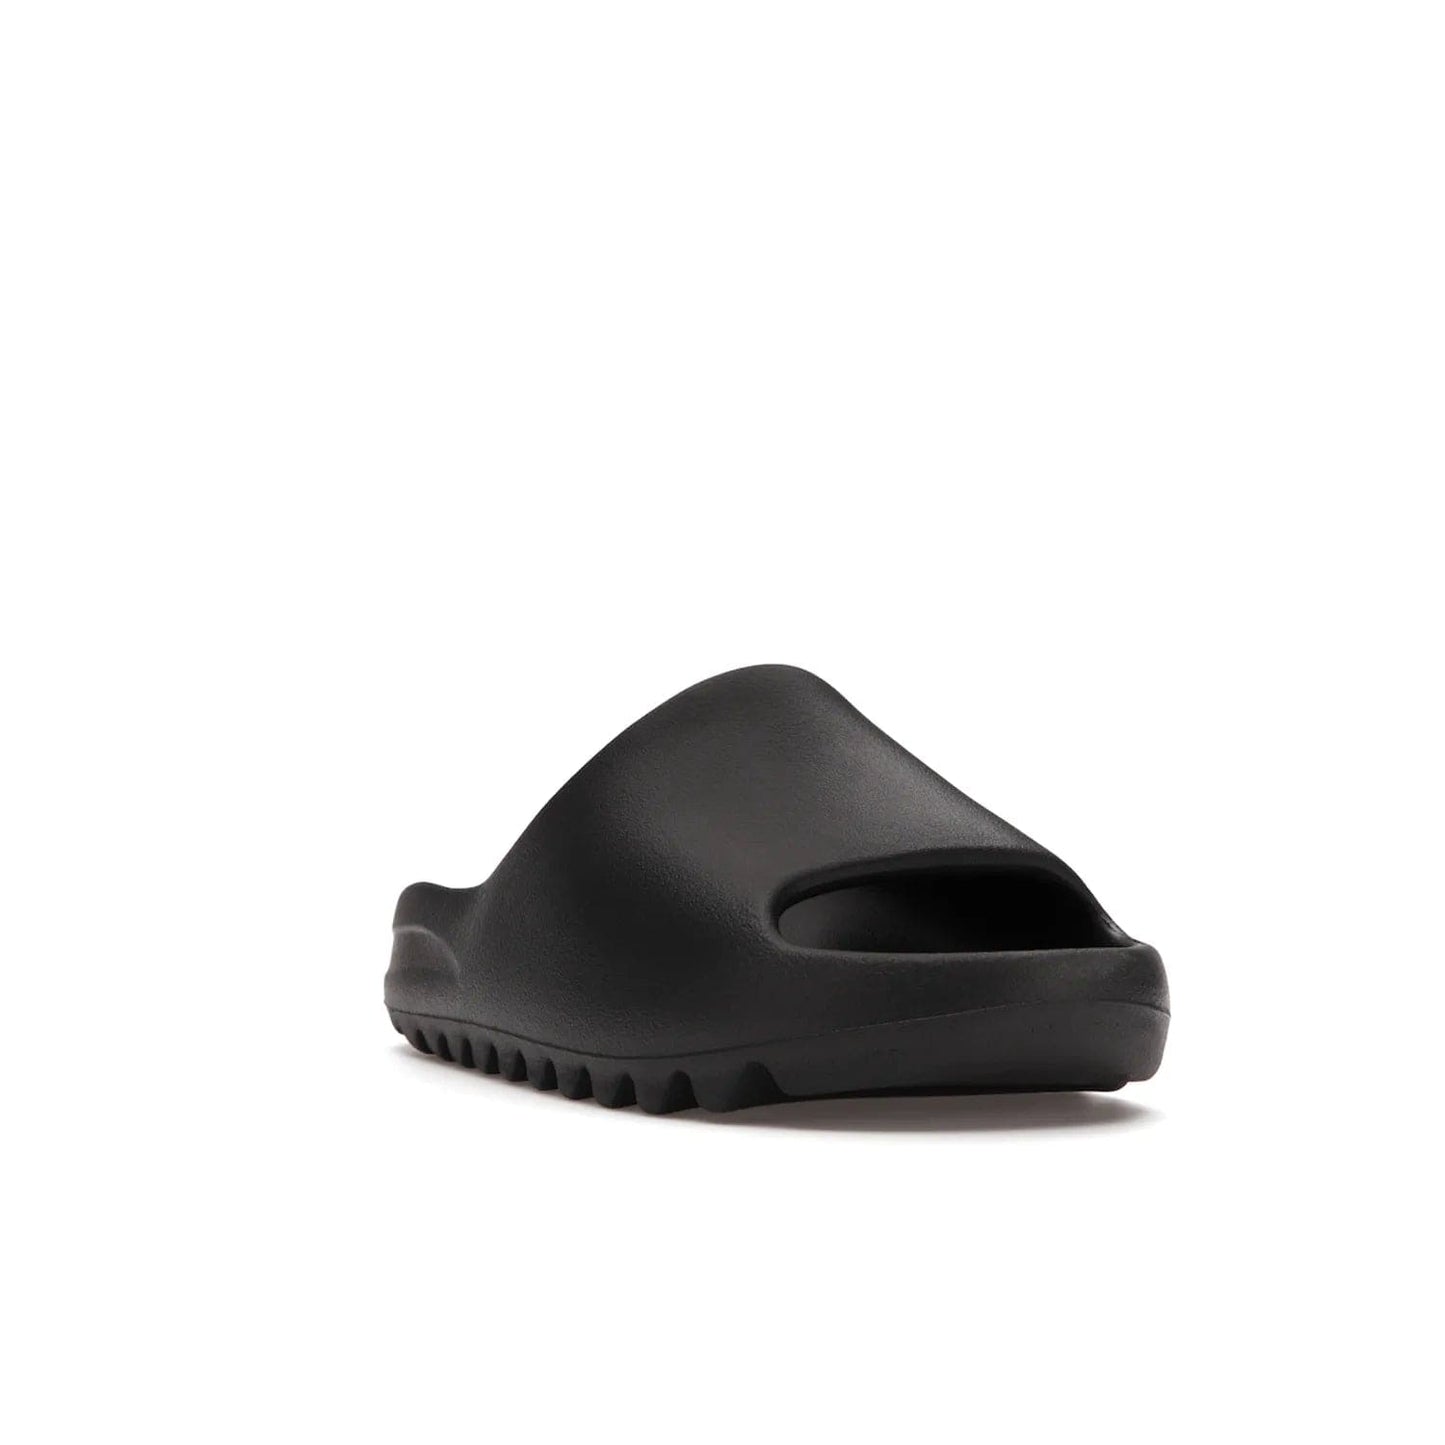 adidas Yeezy Slide Onyx - Image 7 - Only at www.BallersClubKickz.com - Step into comfort and style with the adidas Yeezy Slide Onyx. Featuring foam construction, an all-black colorway and a grooved outsole for stability and responsiveness, this versatile slide is a must-have for your collection.